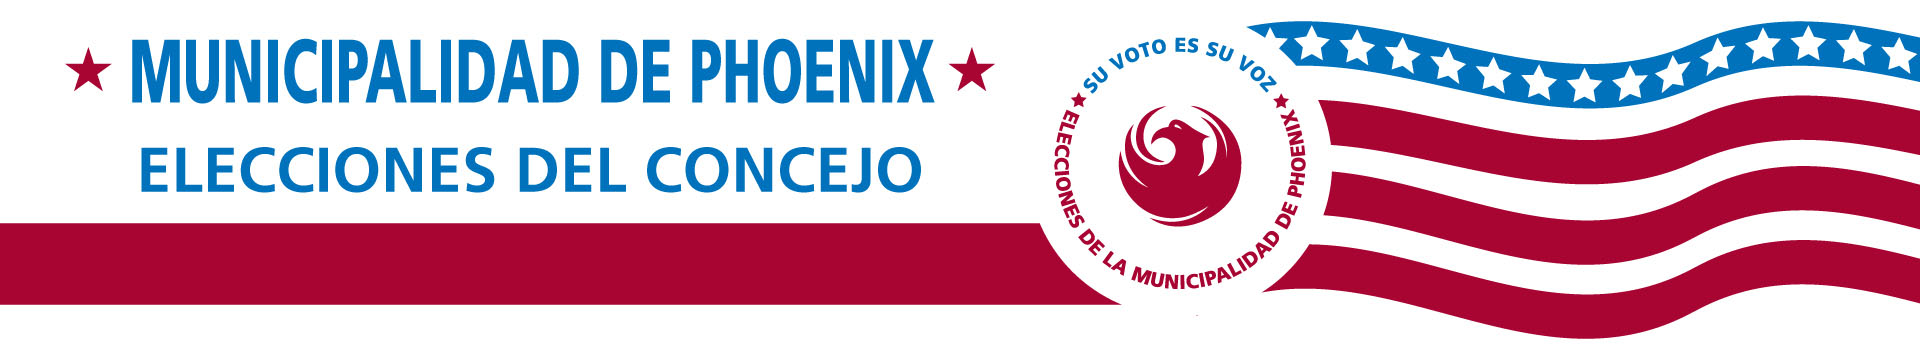 Banner: City of Phoenix official election results Spanish